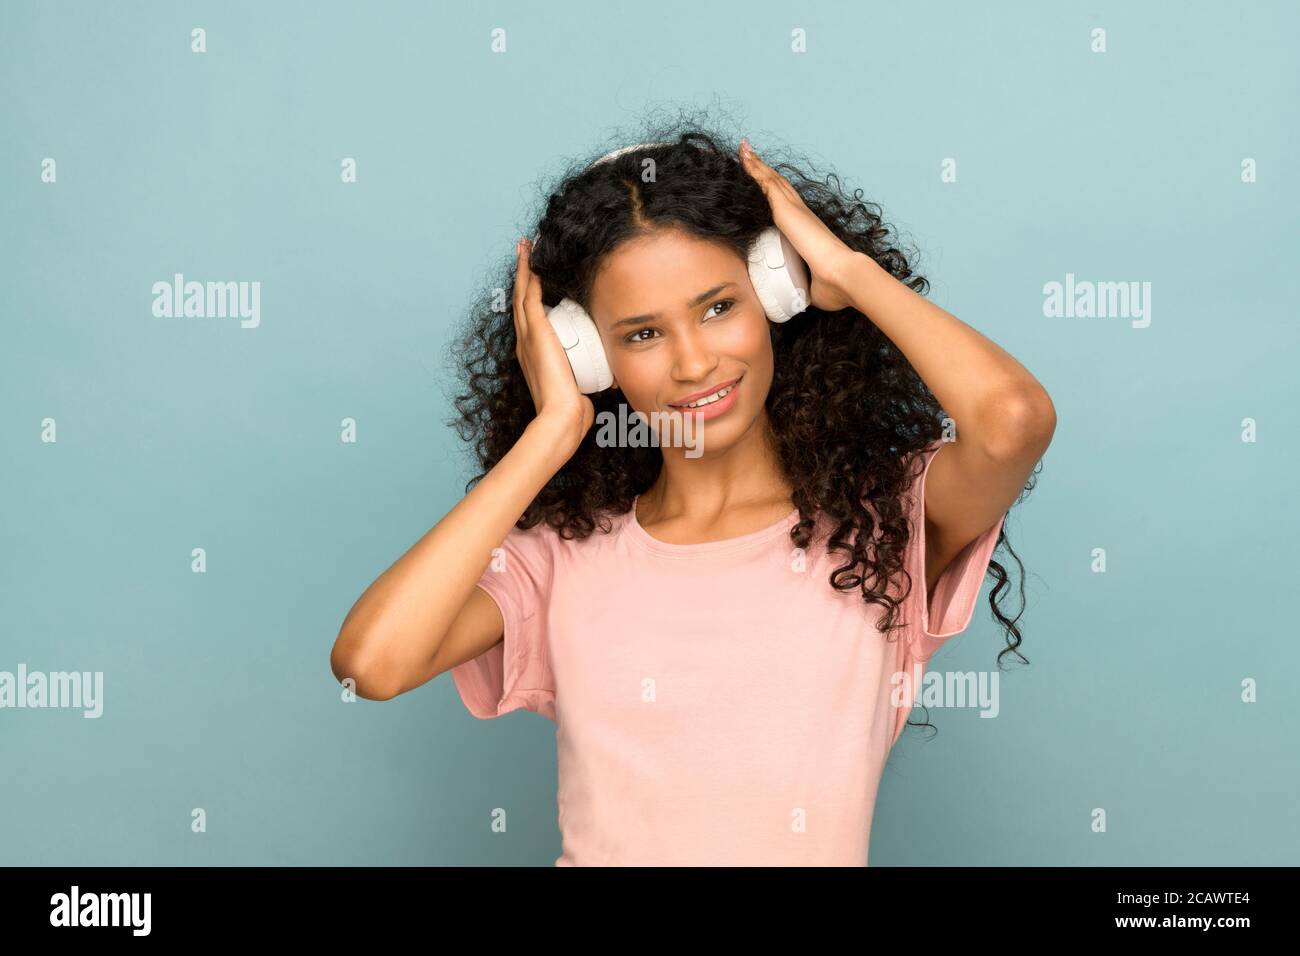 Smiling attractive young Afro American girl with headphones listening to her favorite music in an upper body portrait against a blue studio background Stock Photo